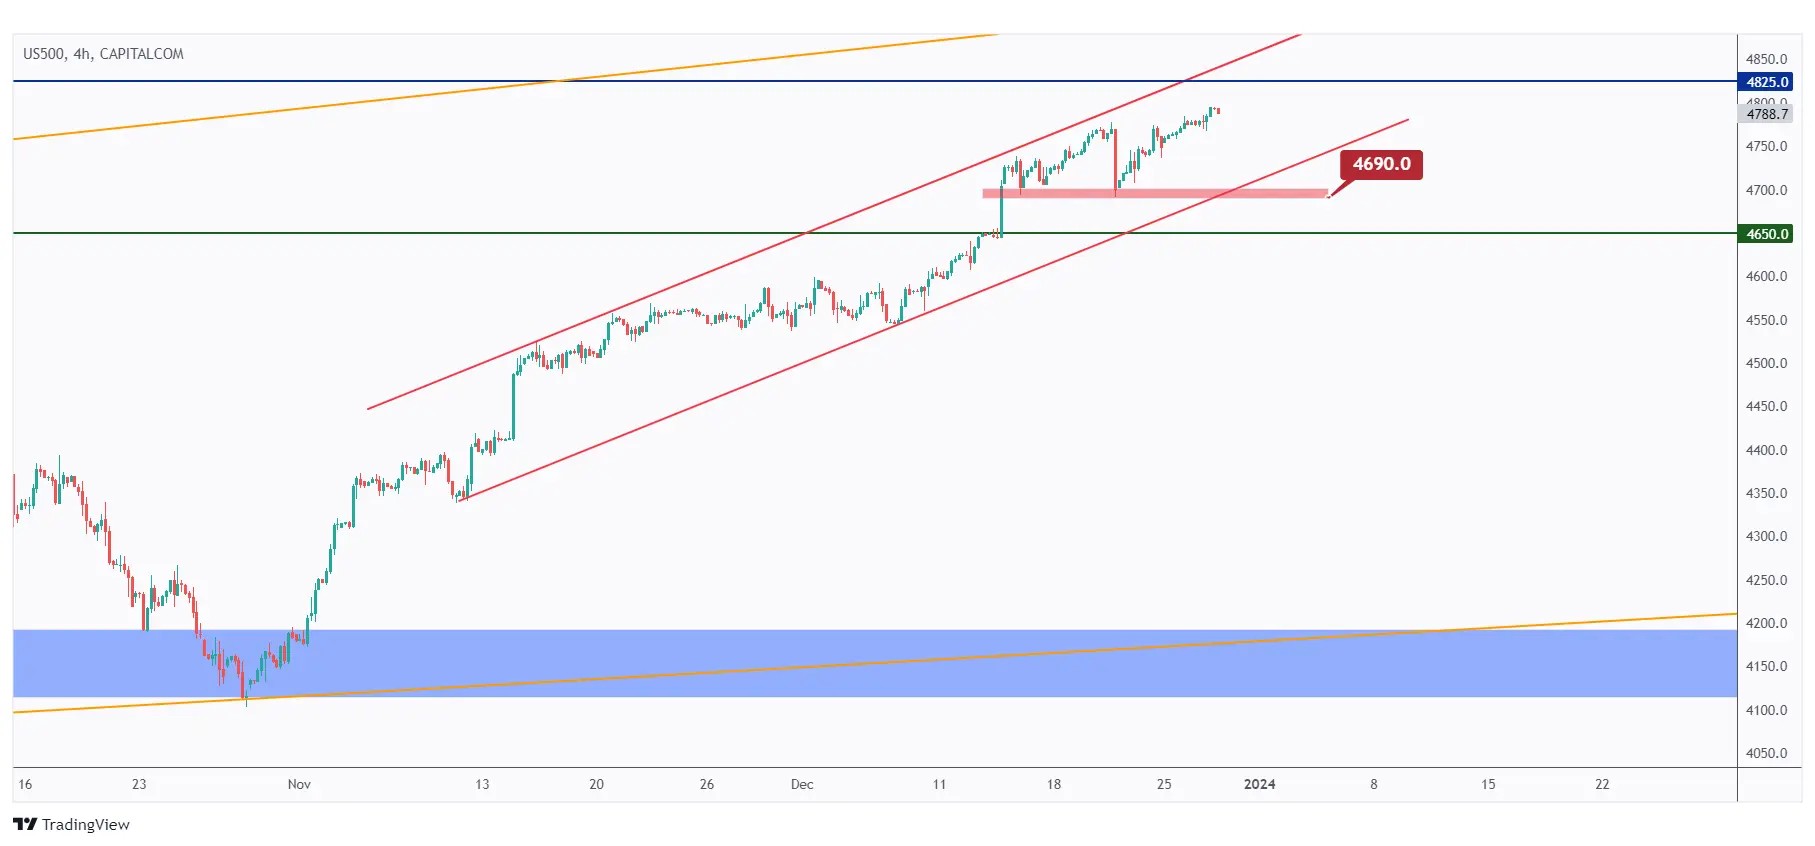 US500 4H chart showing the overall bullish trend trading inside the rising channel